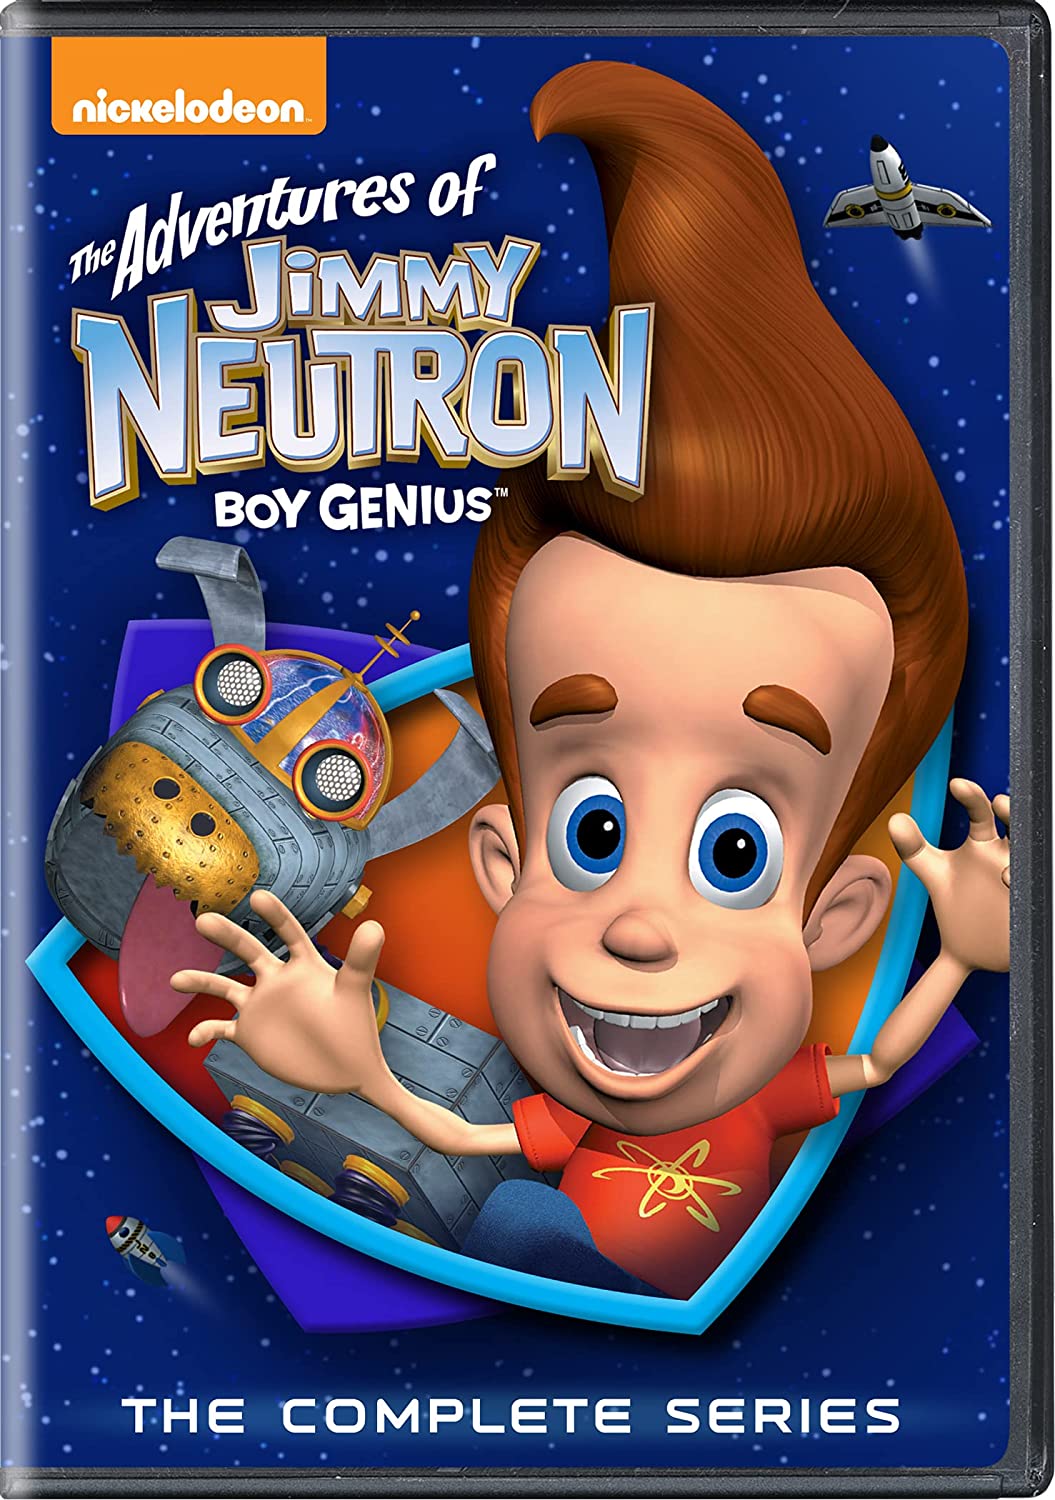 The Complete Series (DVD), Jimmy Neutron Wiki